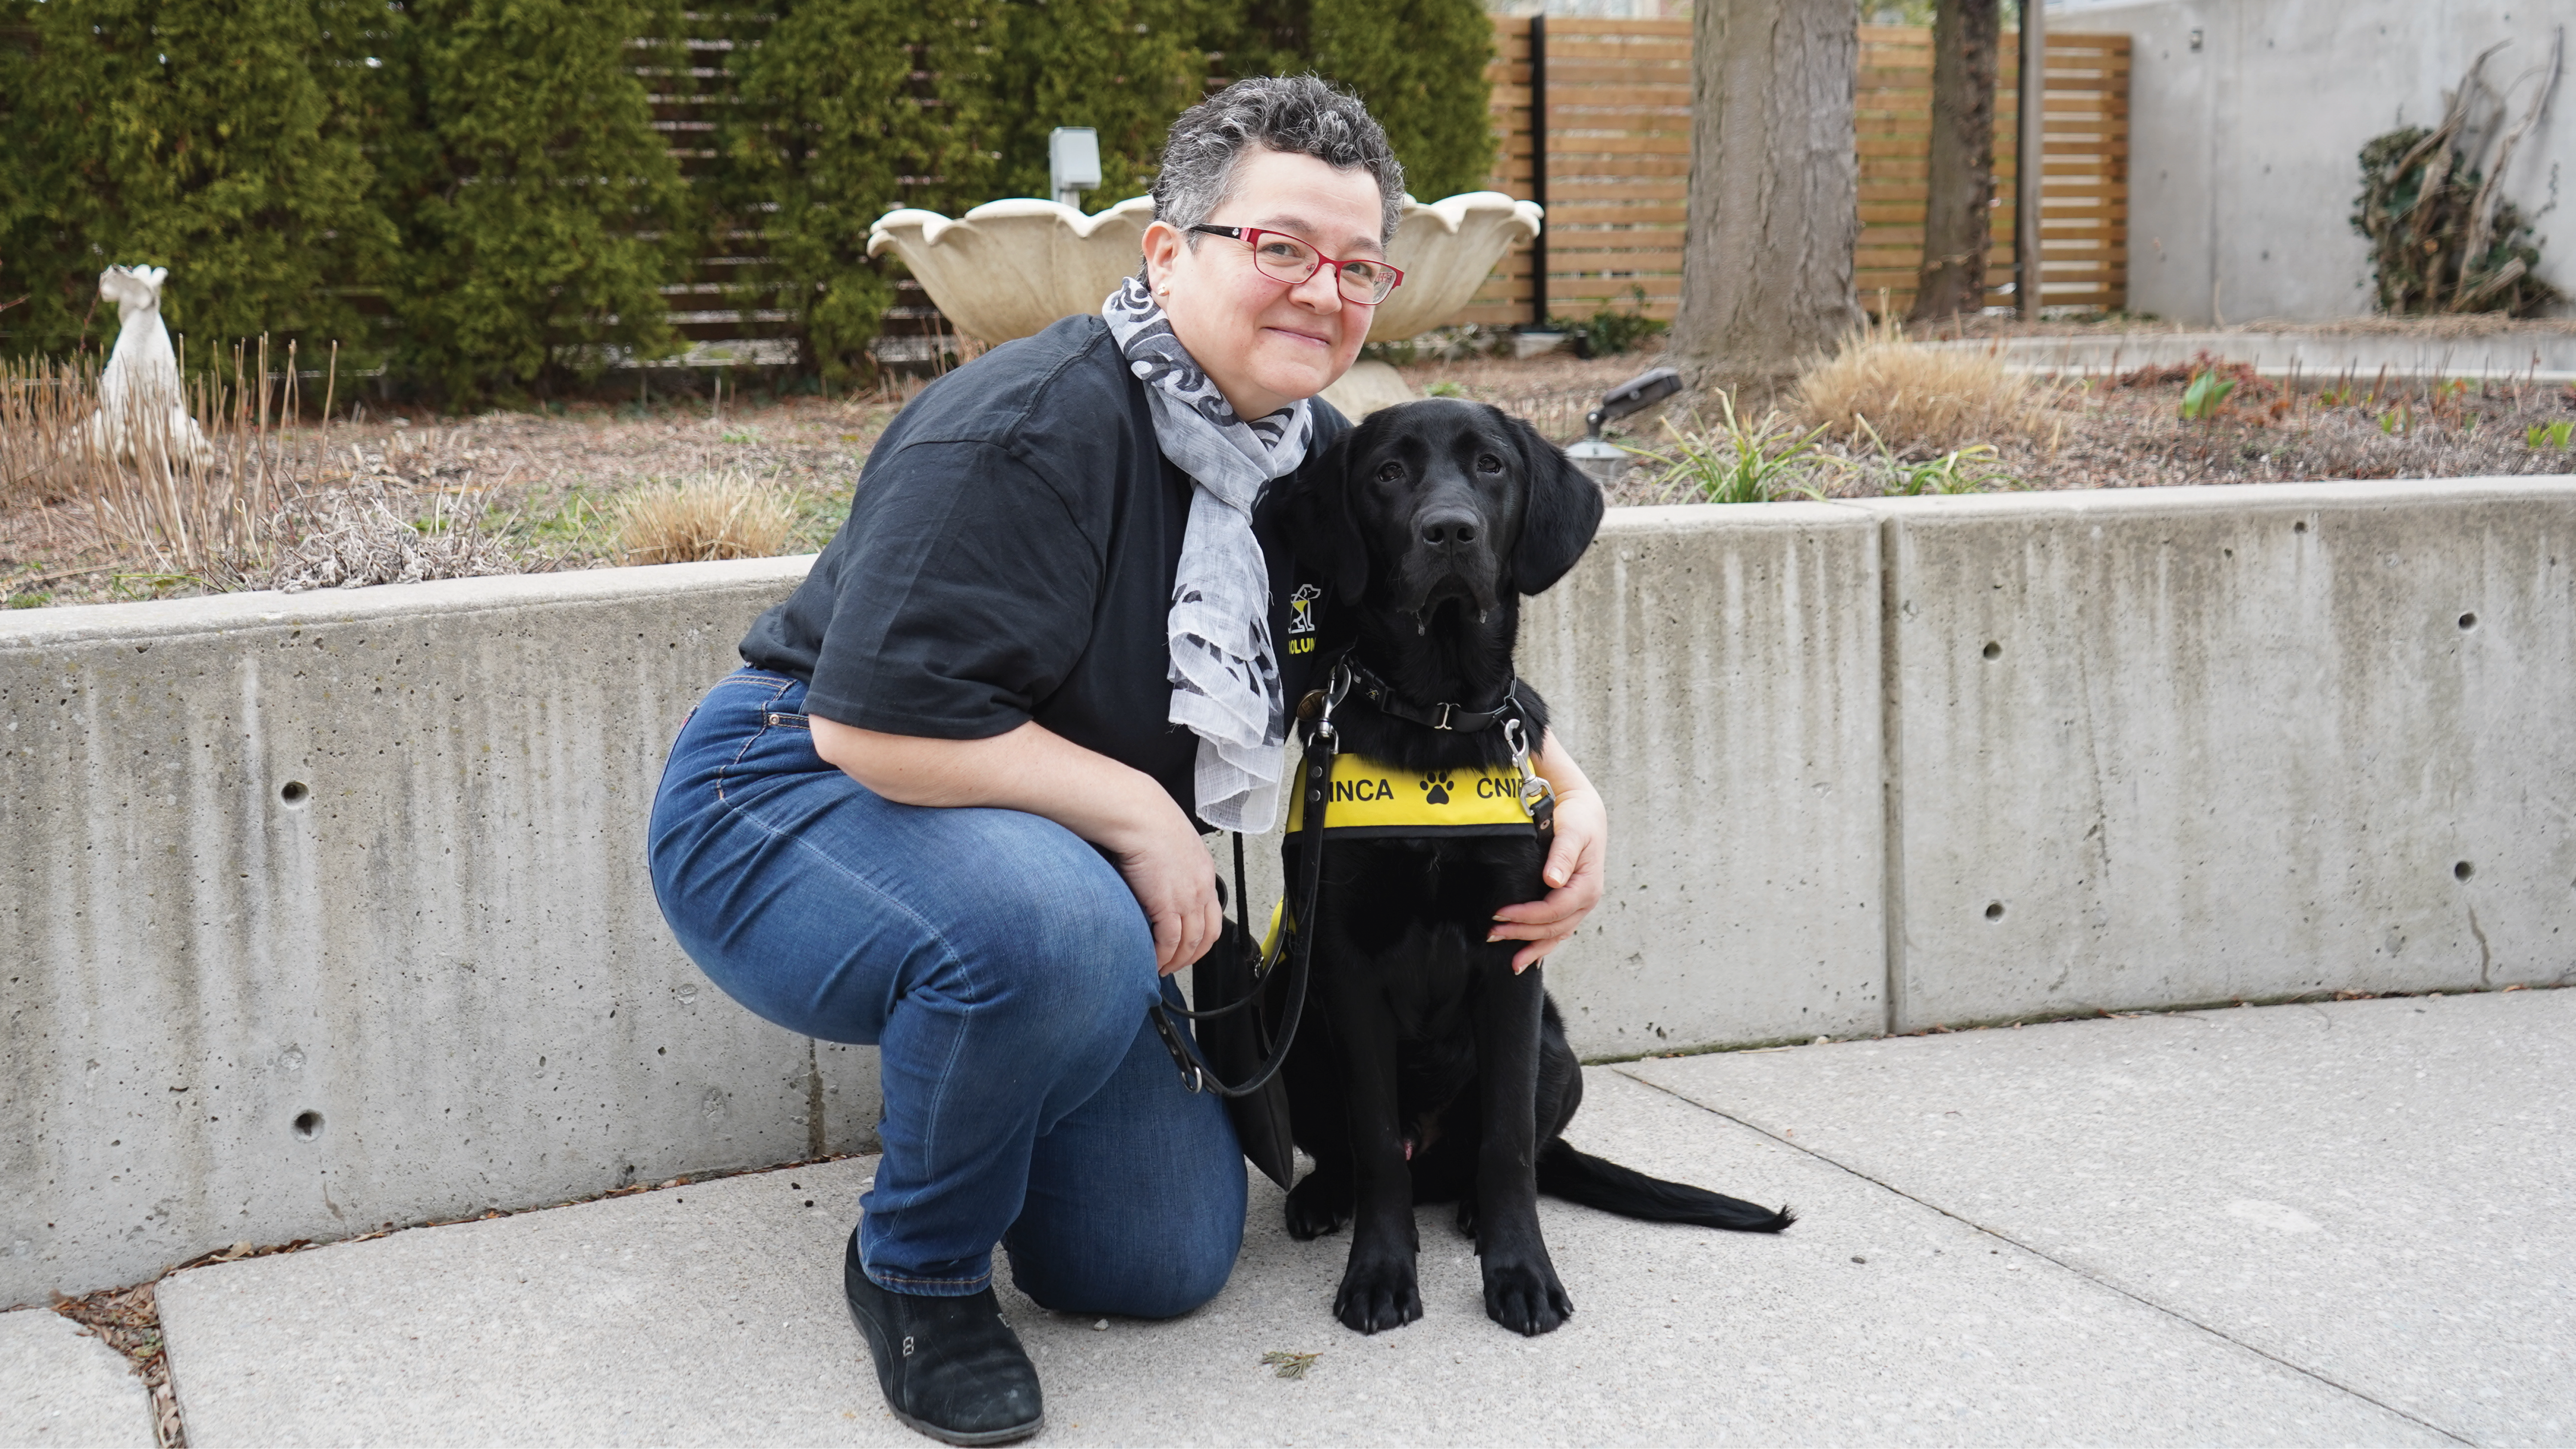 Outdoors, a puppy raising volunteer crouches down on the ground next to a black puppy in training. The puppy raiser has her arm around the pup and the pup is wearing a yellow "future guide dog in training" vest. 